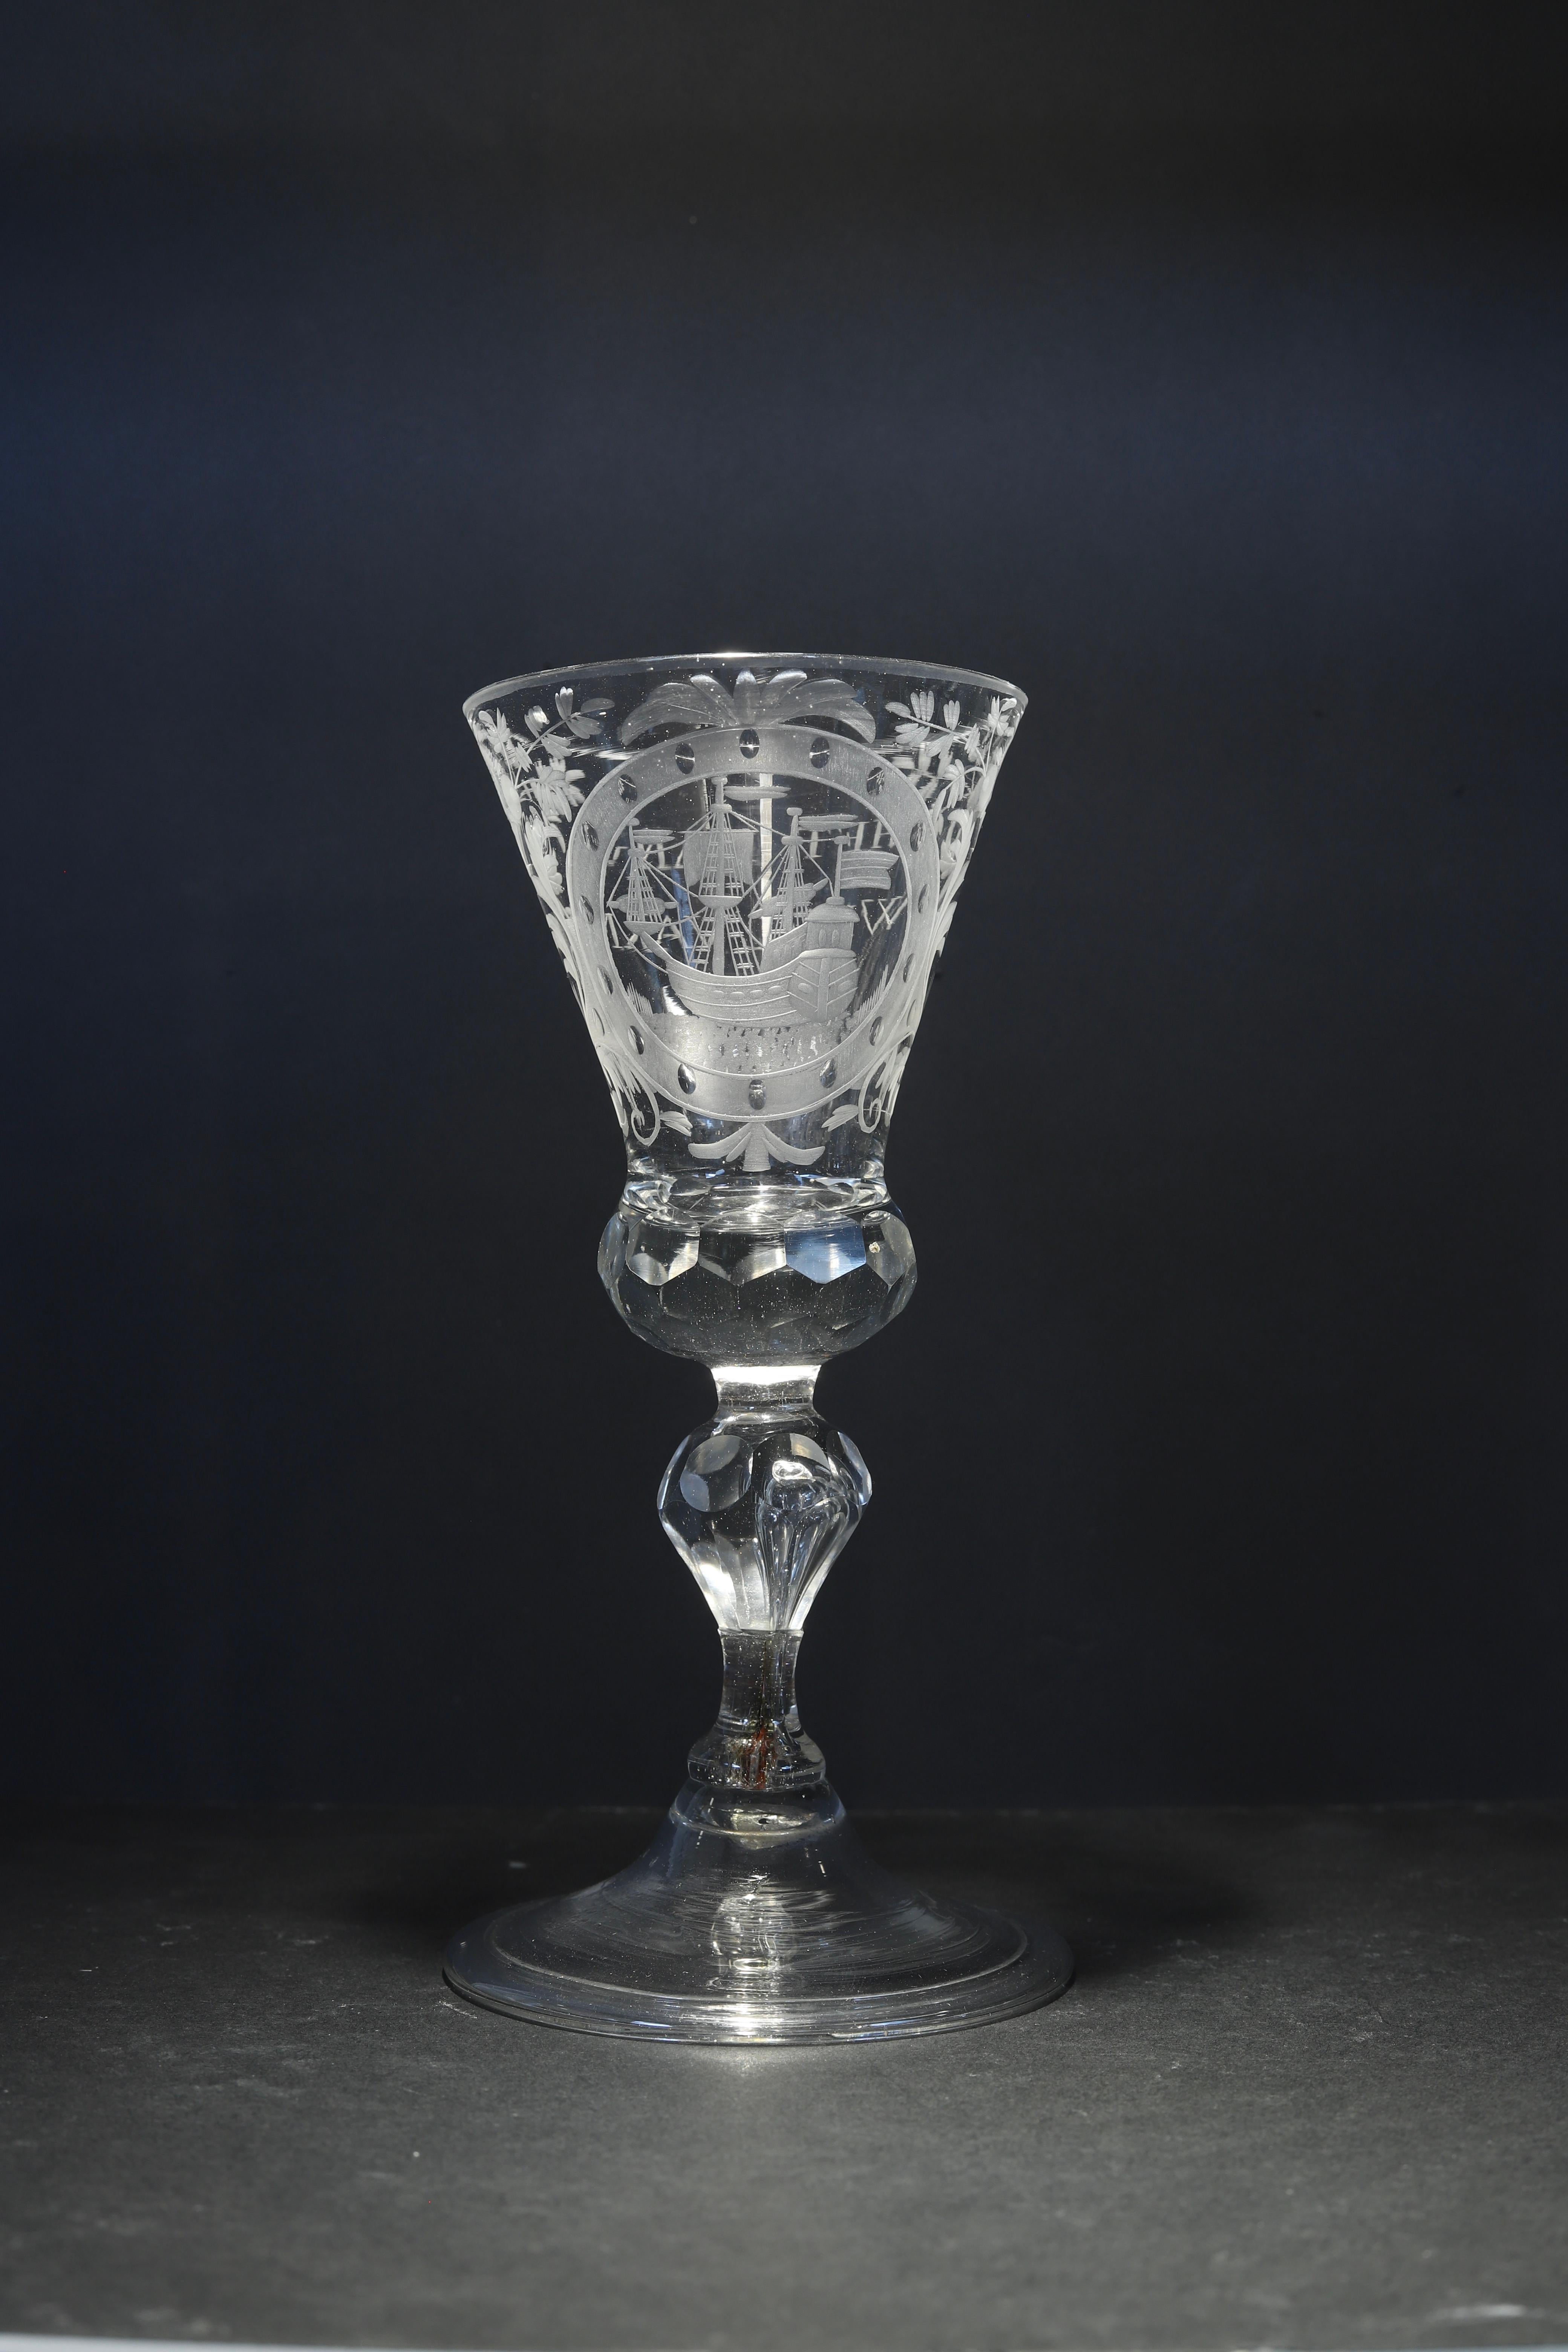 German, Saxon
Engraving: Dutch
Mid 18th century

A Saxon, Dutch engraved wine glass; the thistle bowl with a solid faceted base, decorated with a formal cartouche containing a three-masted sailing ship, flanked by scrollwork and floral sprays, on a